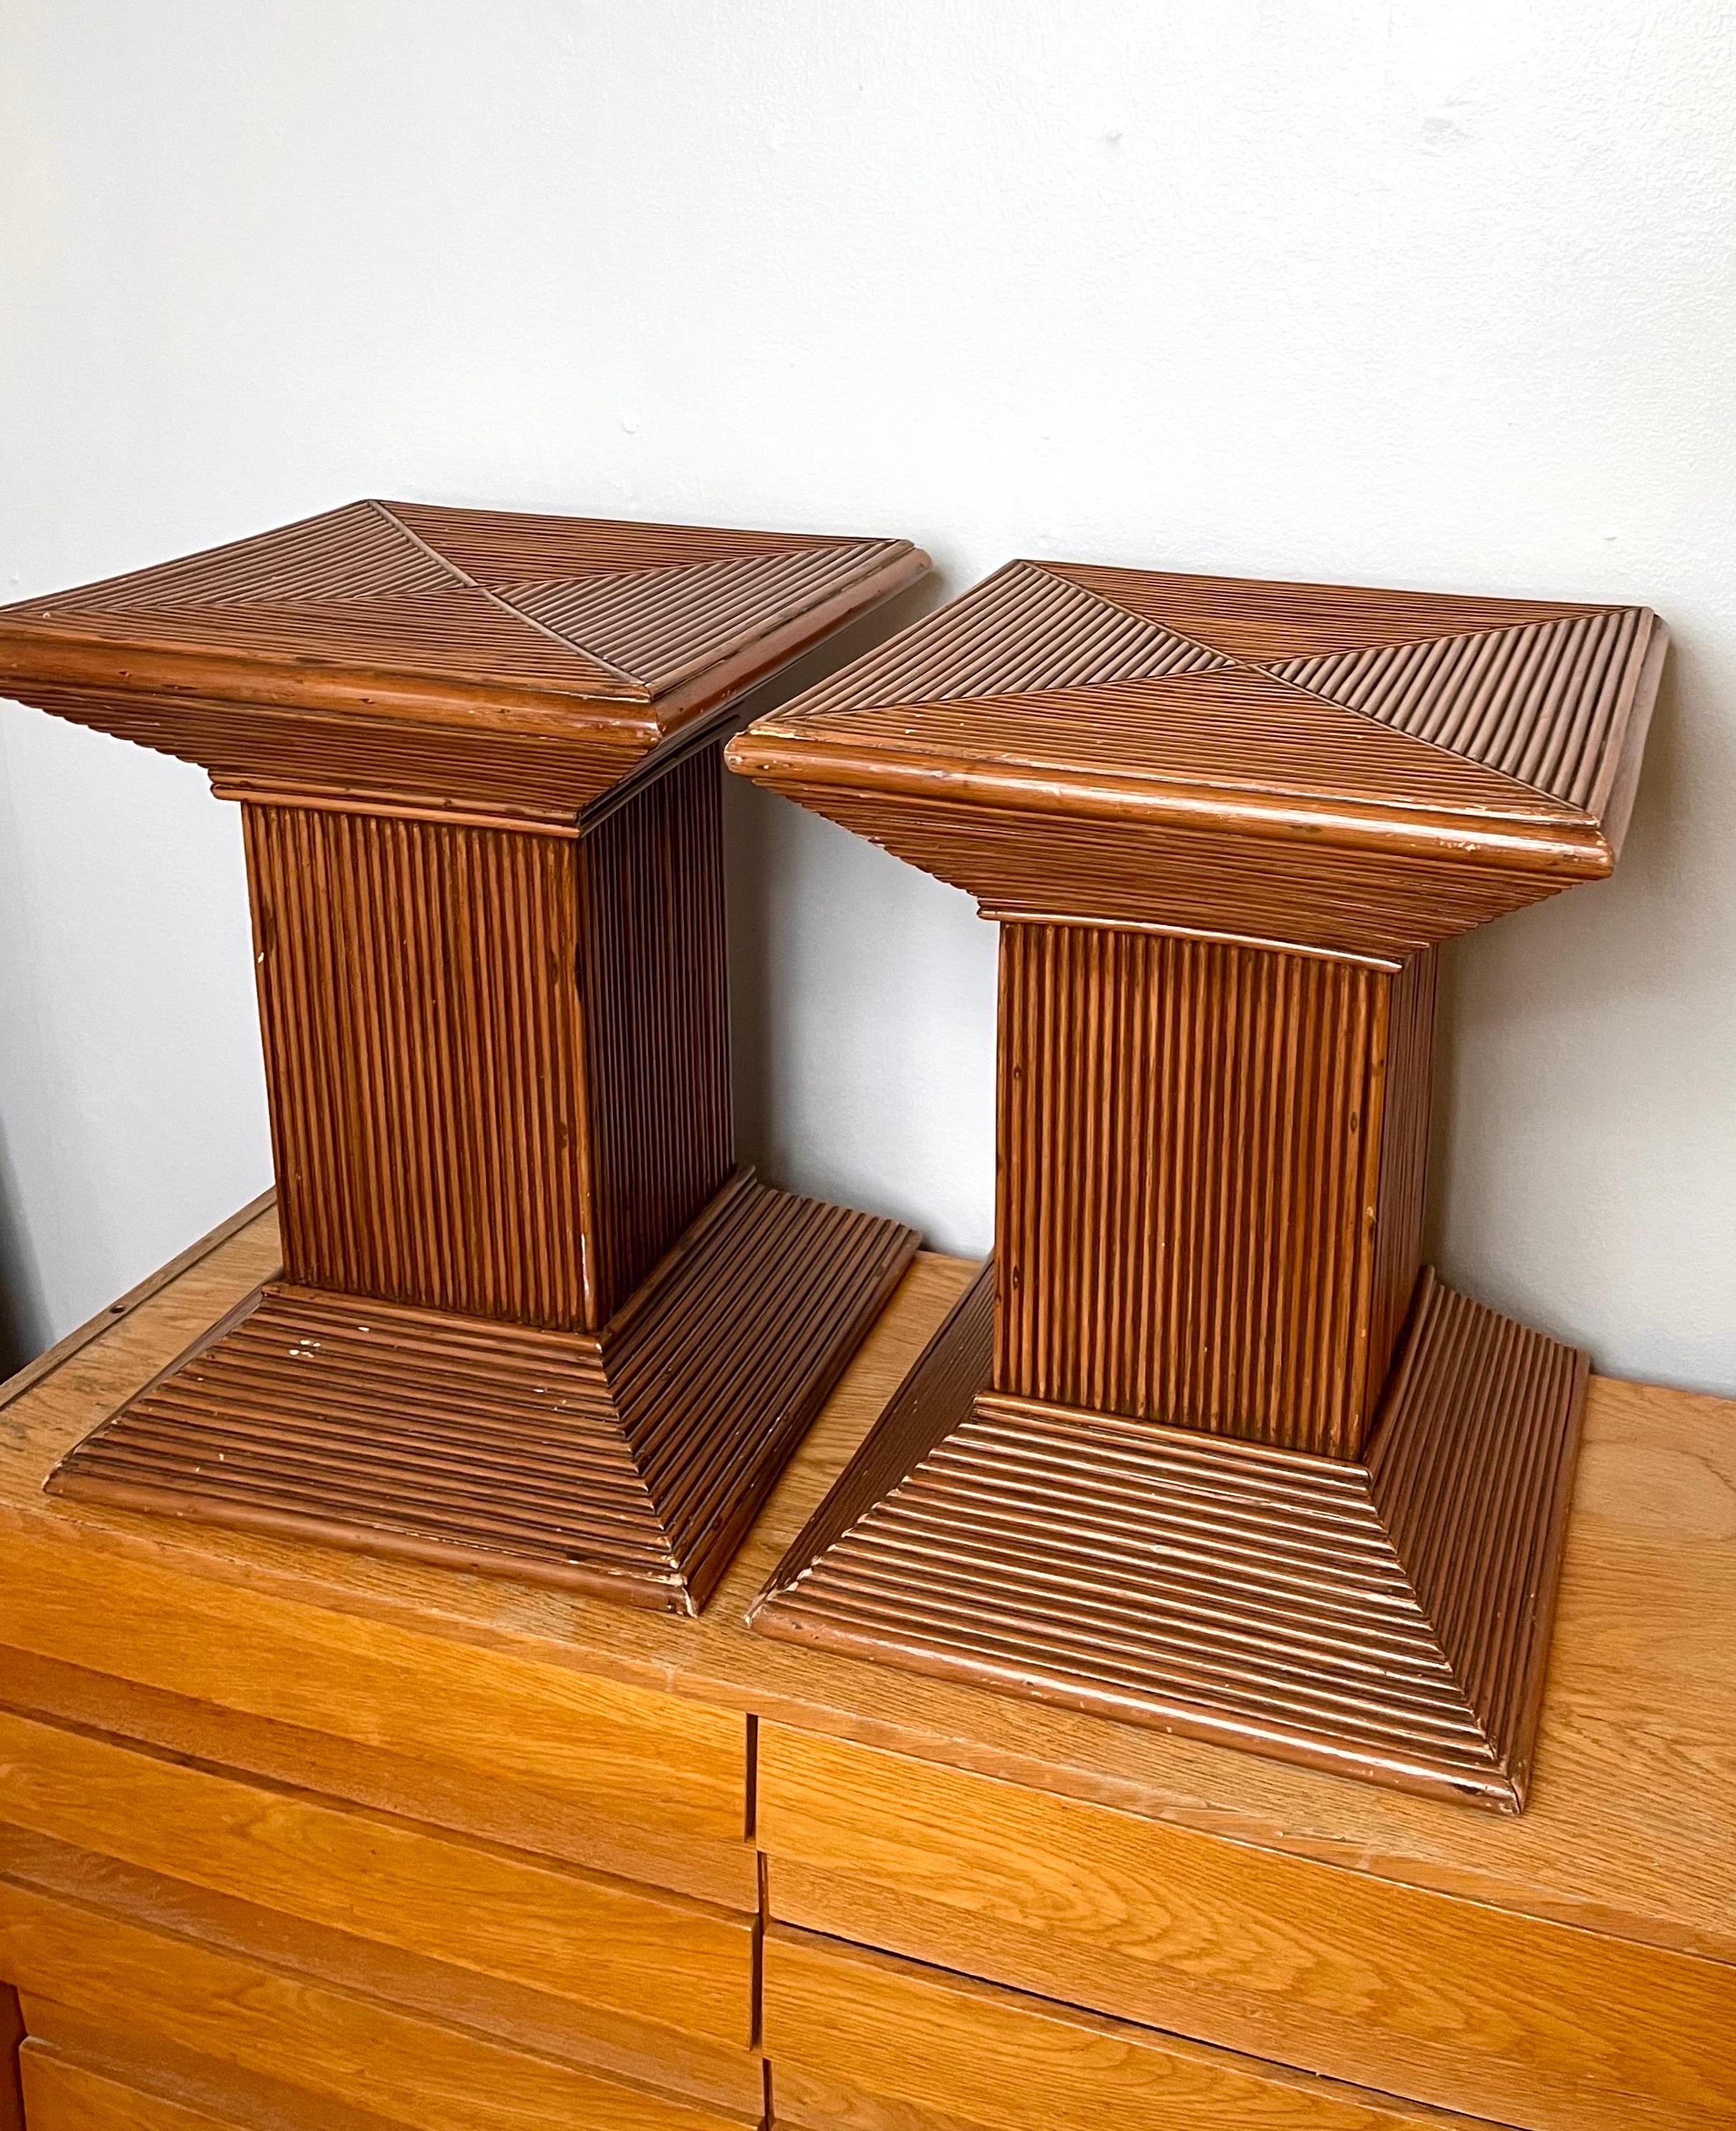 Pair of Pencil Reed Rattan Bamboo Side Tables/ Pedestals

Elevate your decor with this charming pair of vintage bamboo side tables/pedestals, reminiscent of the style of Vivai del Sud. Crafted with bamboo and rattan, these tables exude a timeless